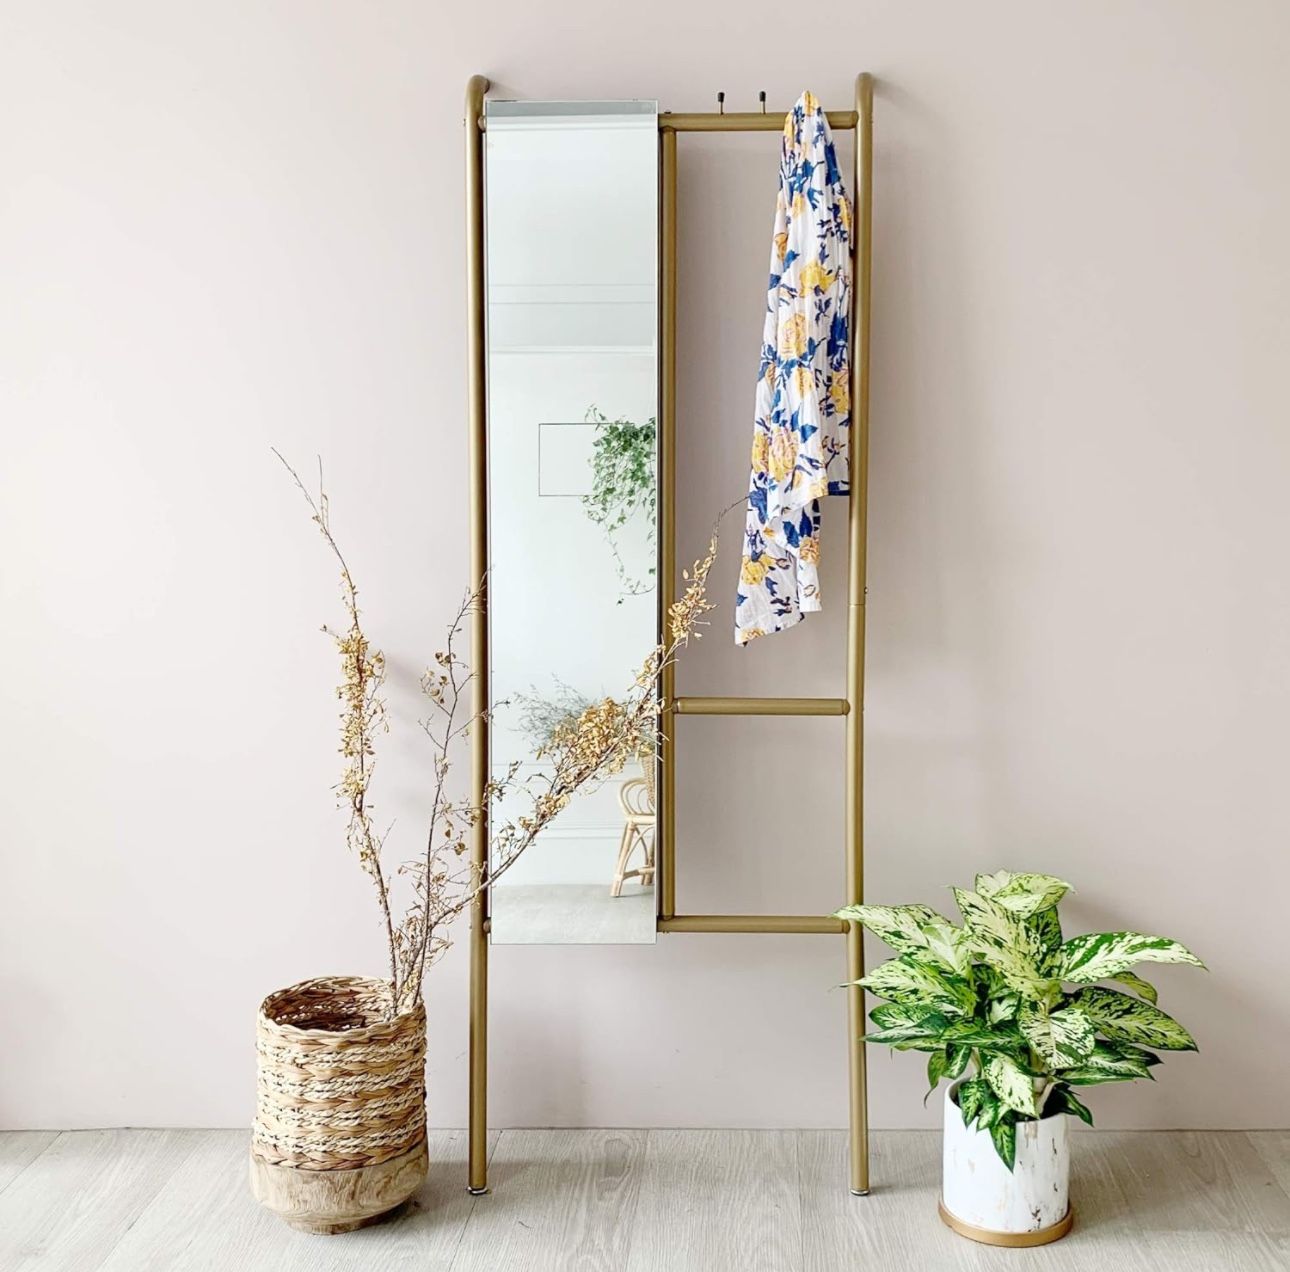 Full Length Mirror with Clothes Hooks and Racks